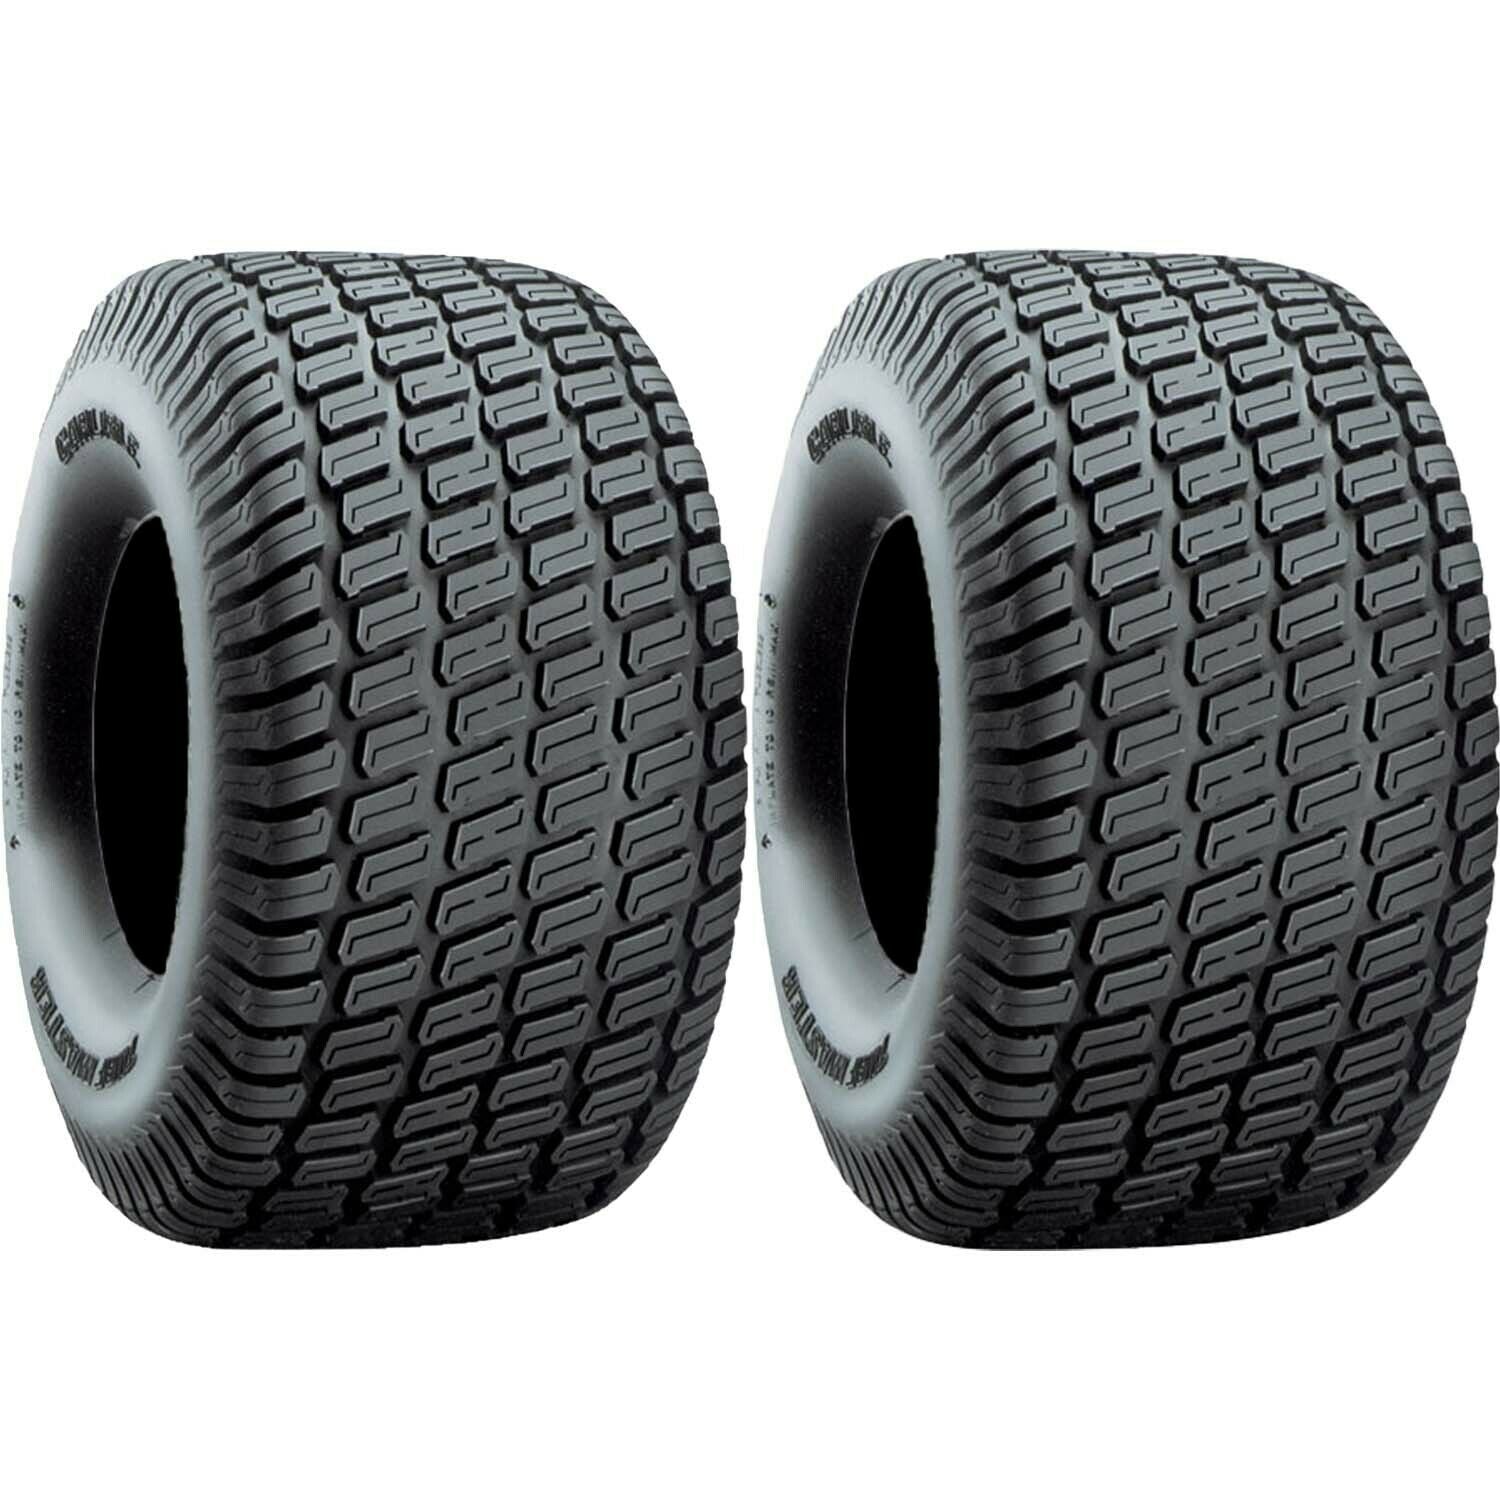 Carlisle Turf Master Lawn and Garden Tire 4Ply 22x10.50-12 - Pack of 2